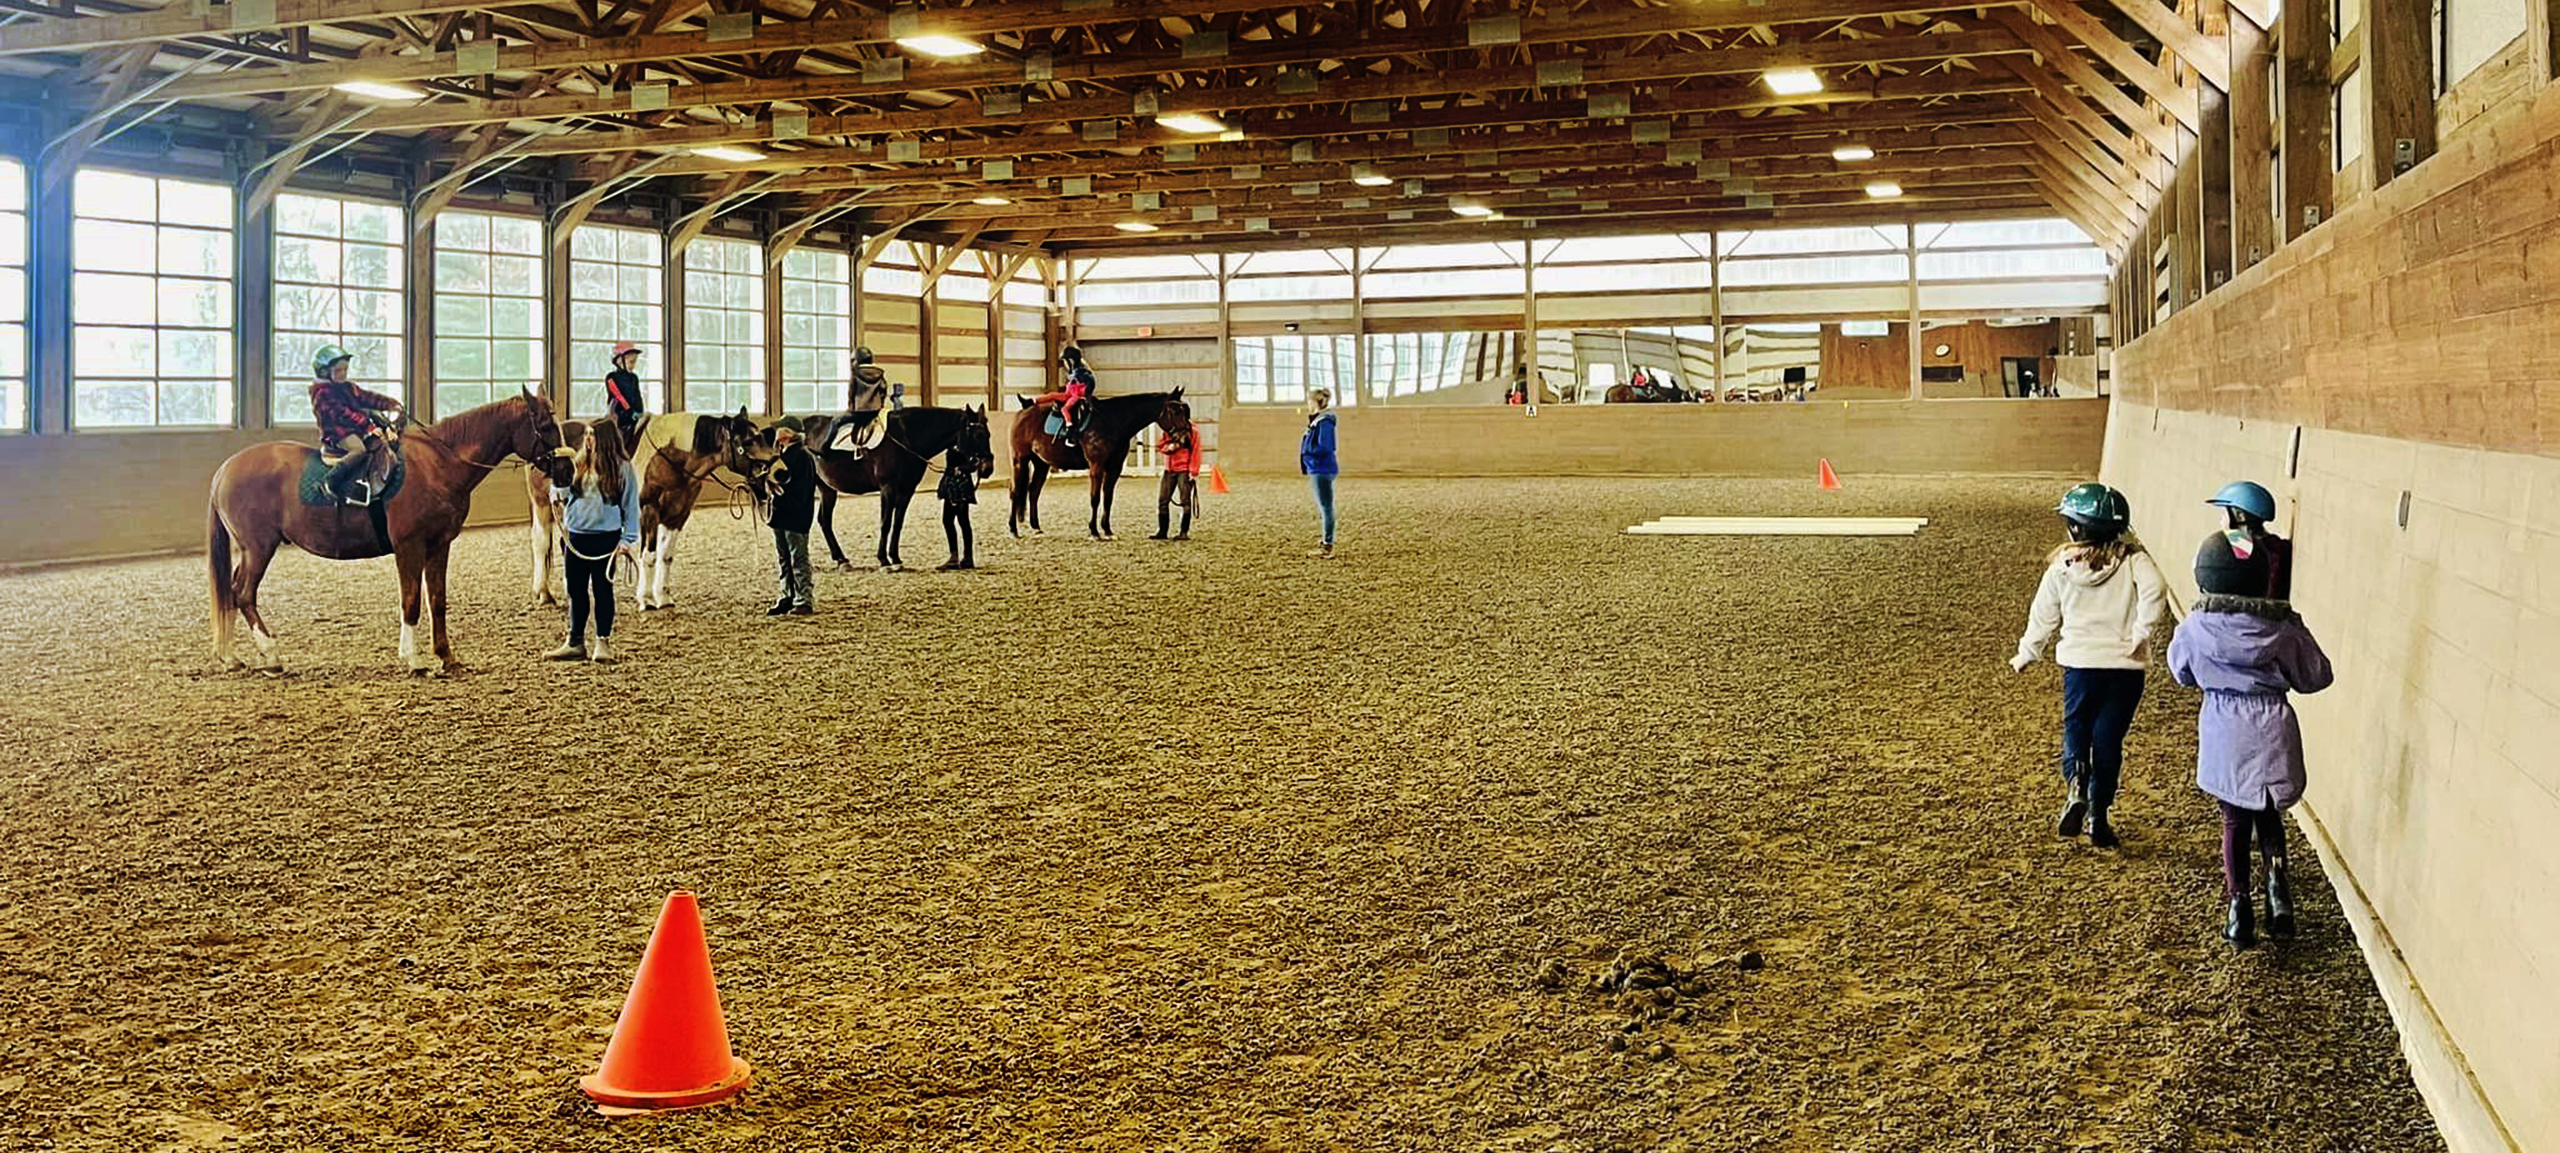 The Riding Academy